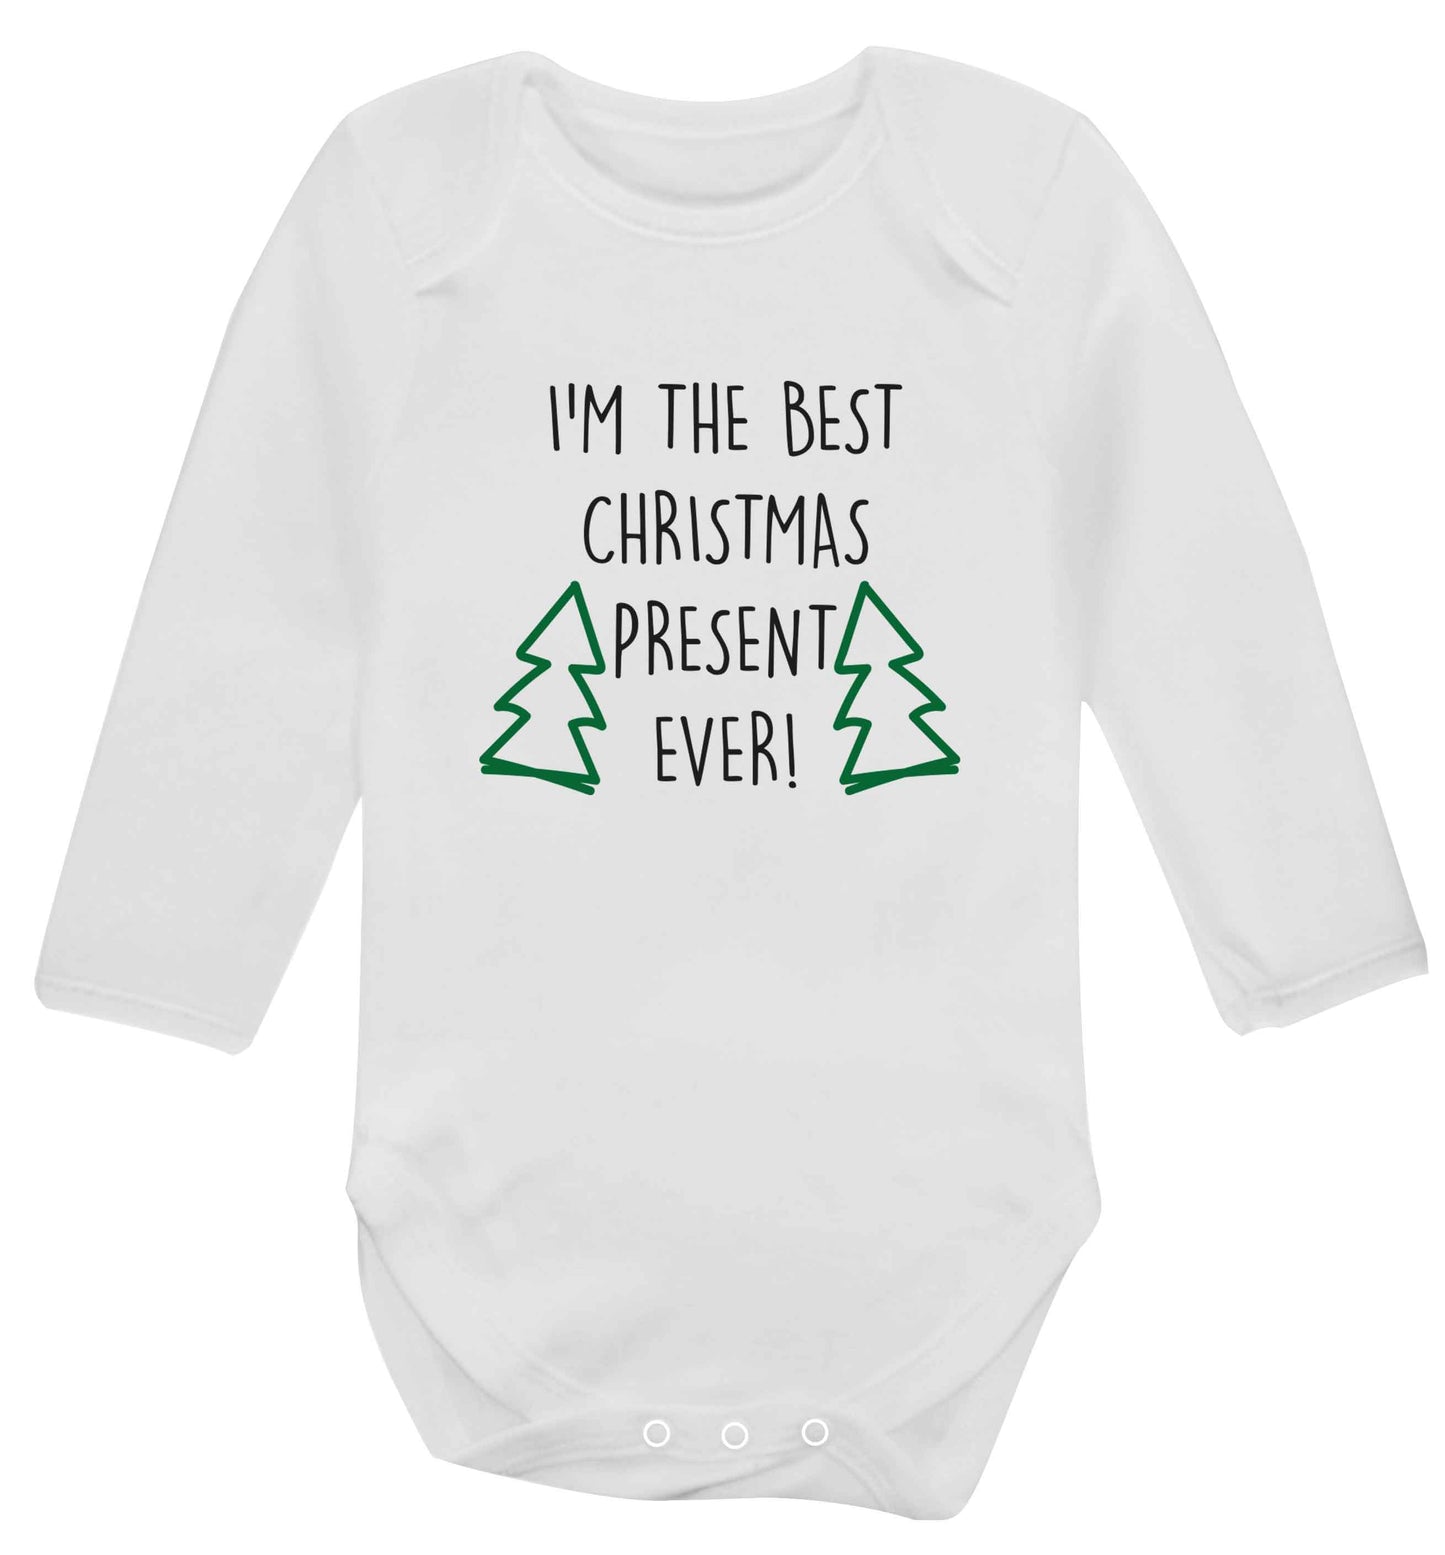 I'm the best Christmas present ever baby vest long sleeved white 6-12 months